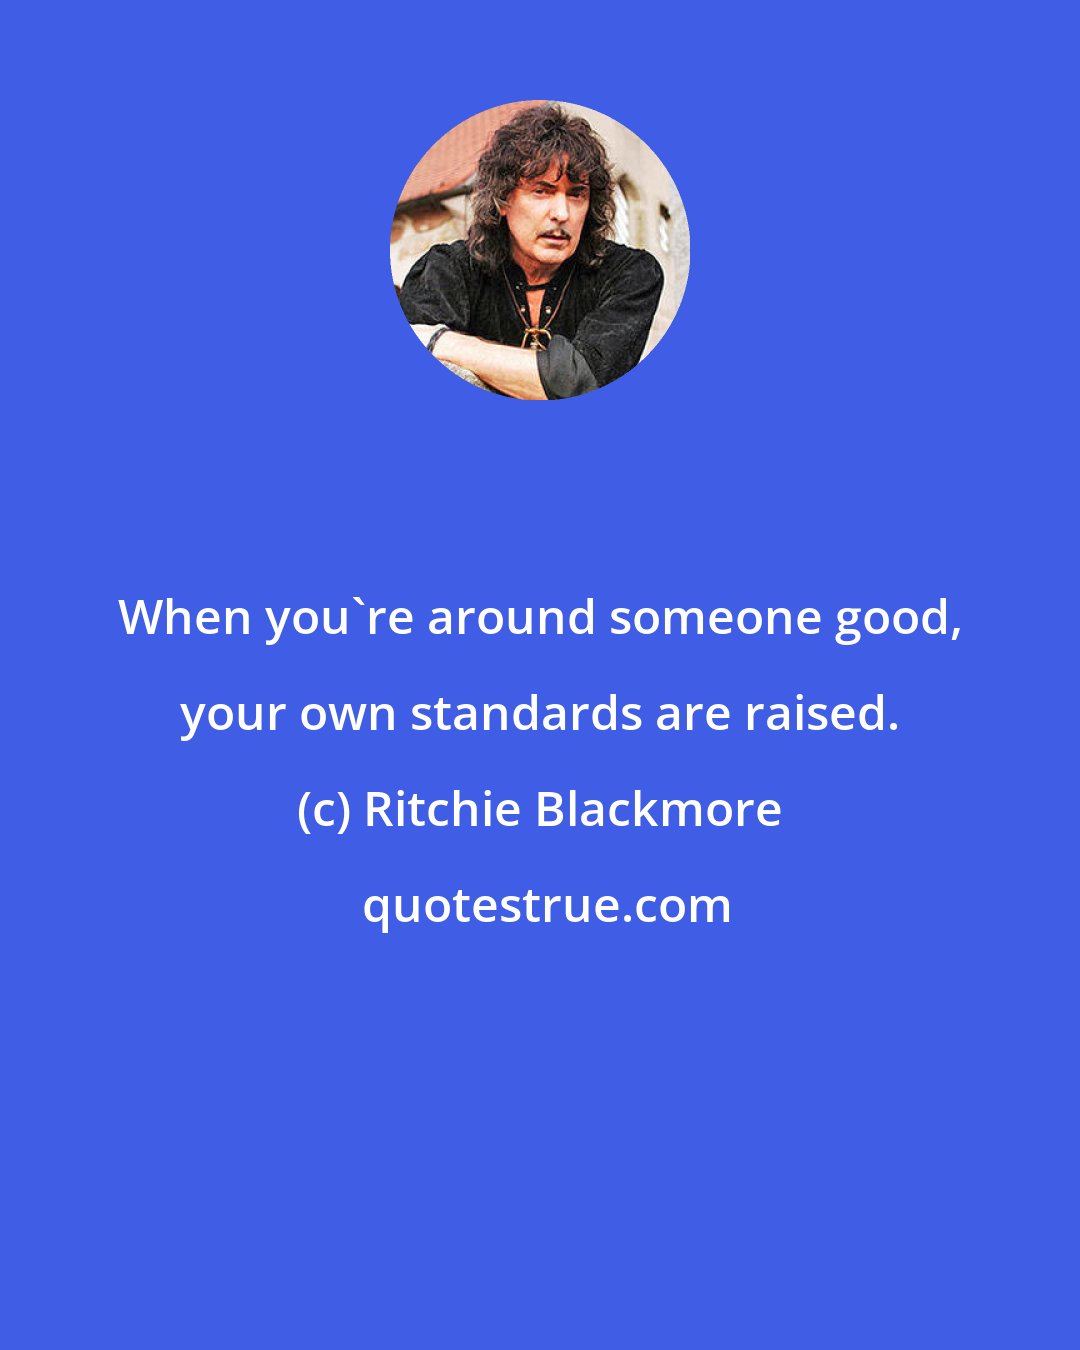 Ritchie Blackmore: When you're around someone good, your own standards are raised.